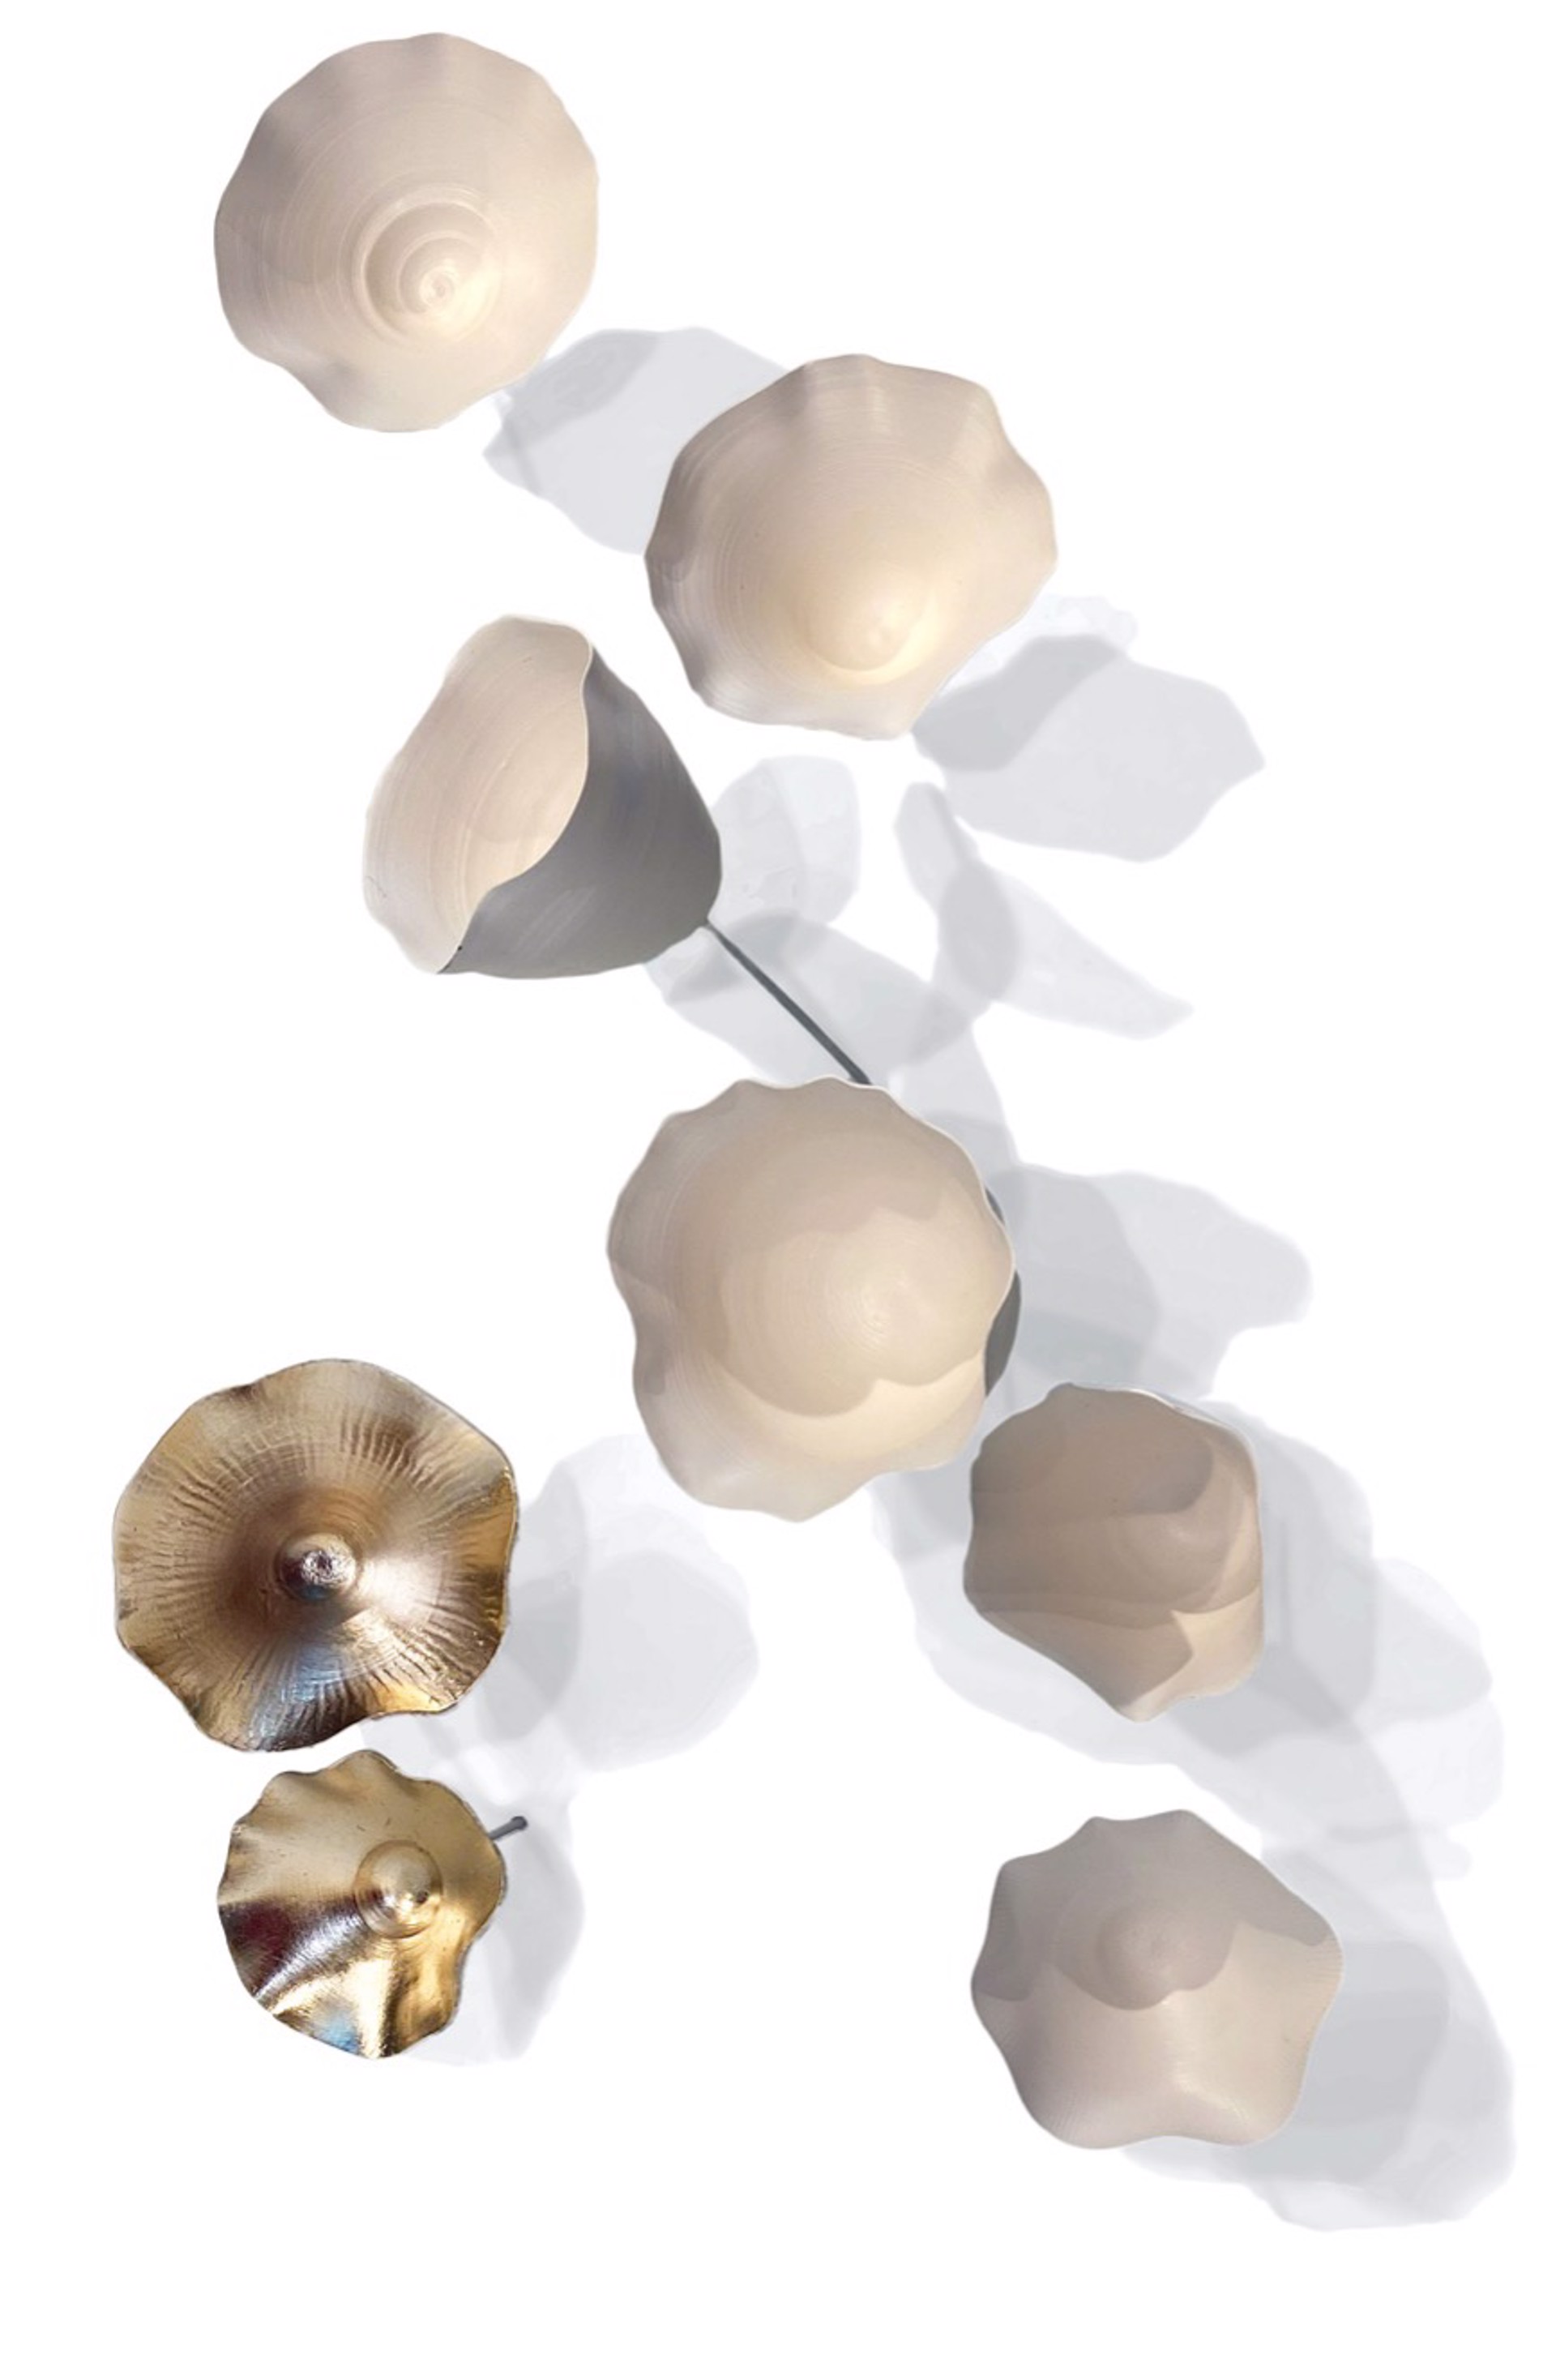 Lucrecia Waggoner Porcelain Wall Installation Custom Artwork Lucrecia Waggoner What Keeps You Dreaming?, 2021 Polished porcelain tulips and moon-gold6 x 13.50 ft